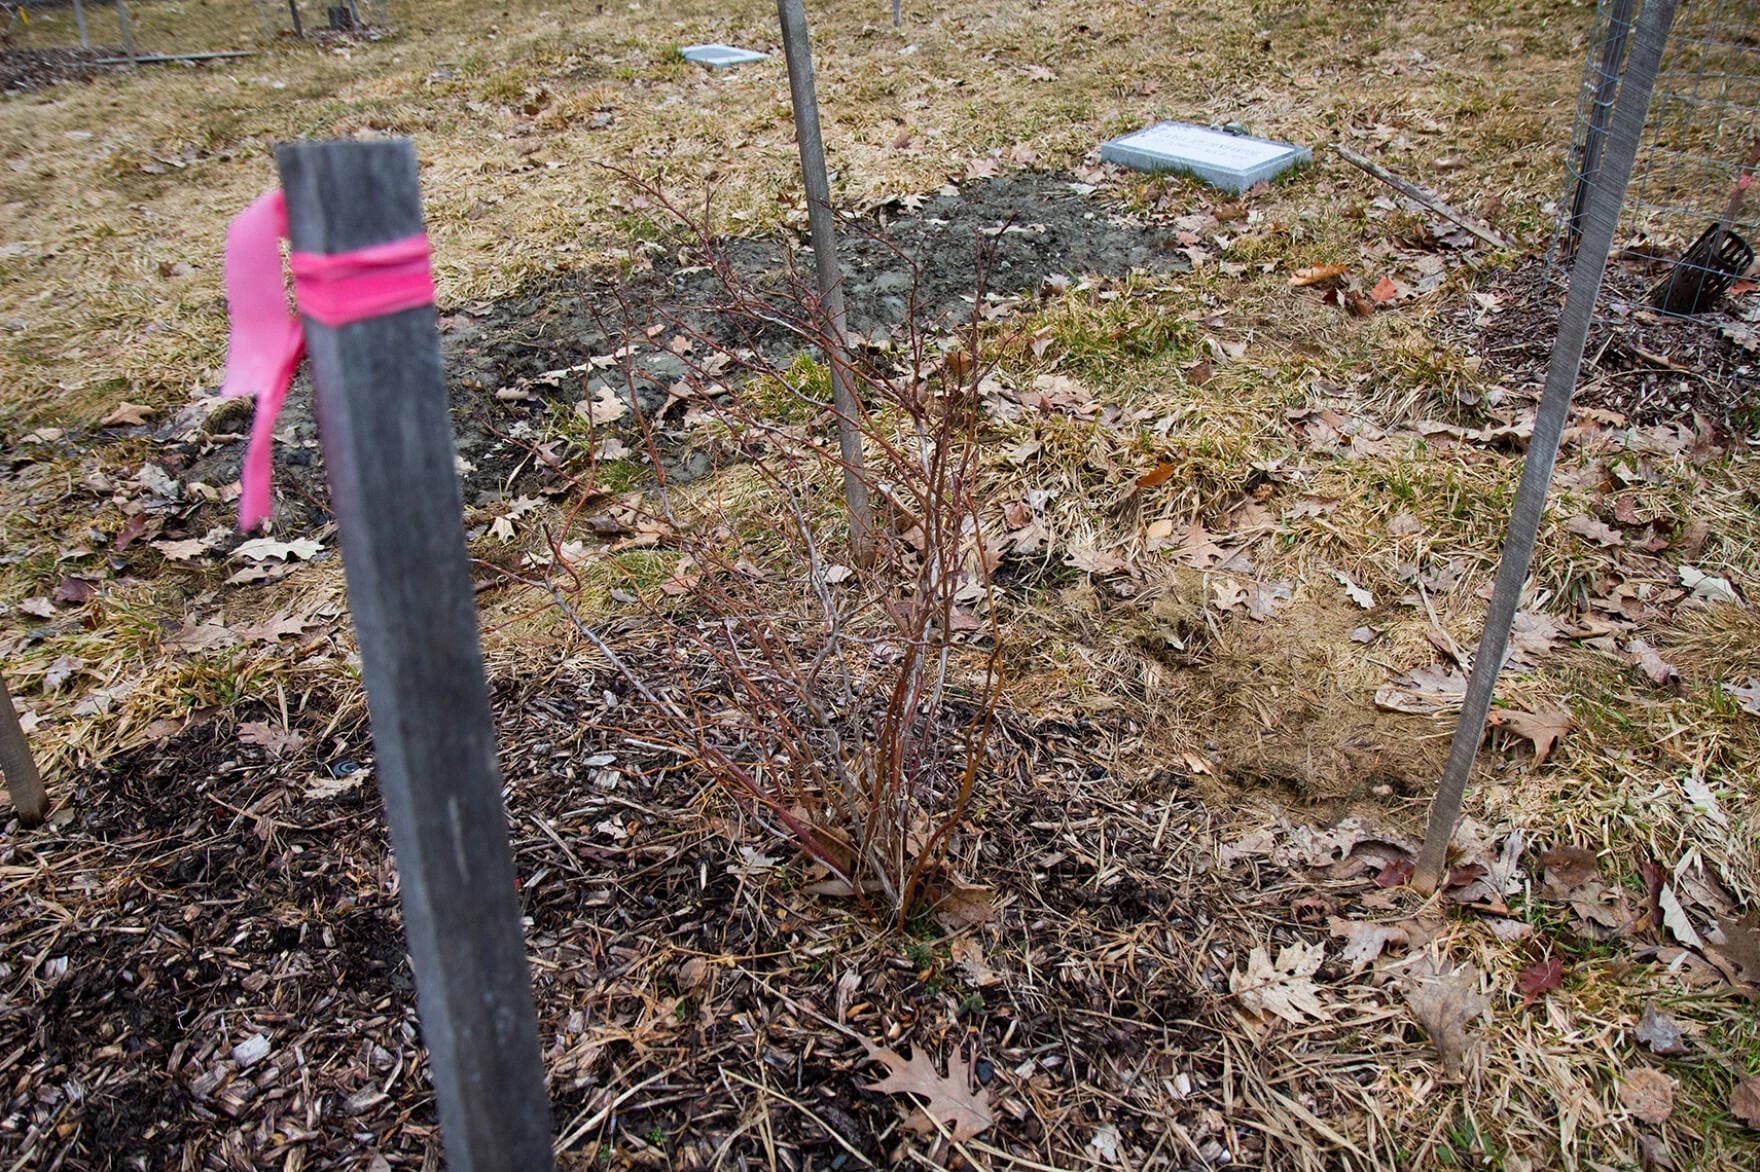 Green Mount is adding blueberry bushes, apple trees, and wildflowers to their natural burial section. Healy said he didn't think it would take off as fast as it did. (Elodie Reed/Vermont Public)